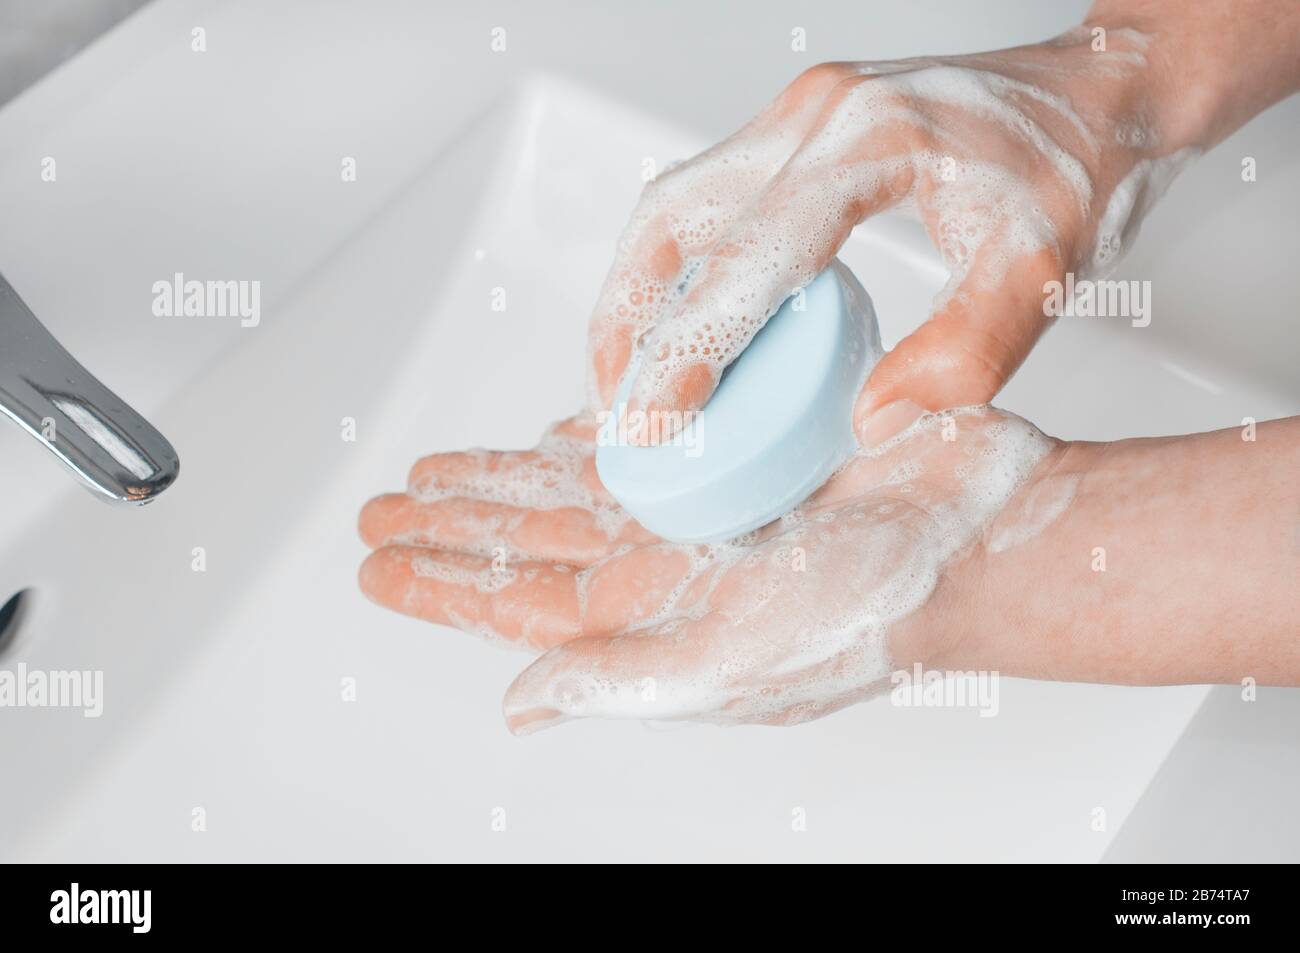 Hand washing techniques: woman soaping her hands with a bar of soap. Stock Photo